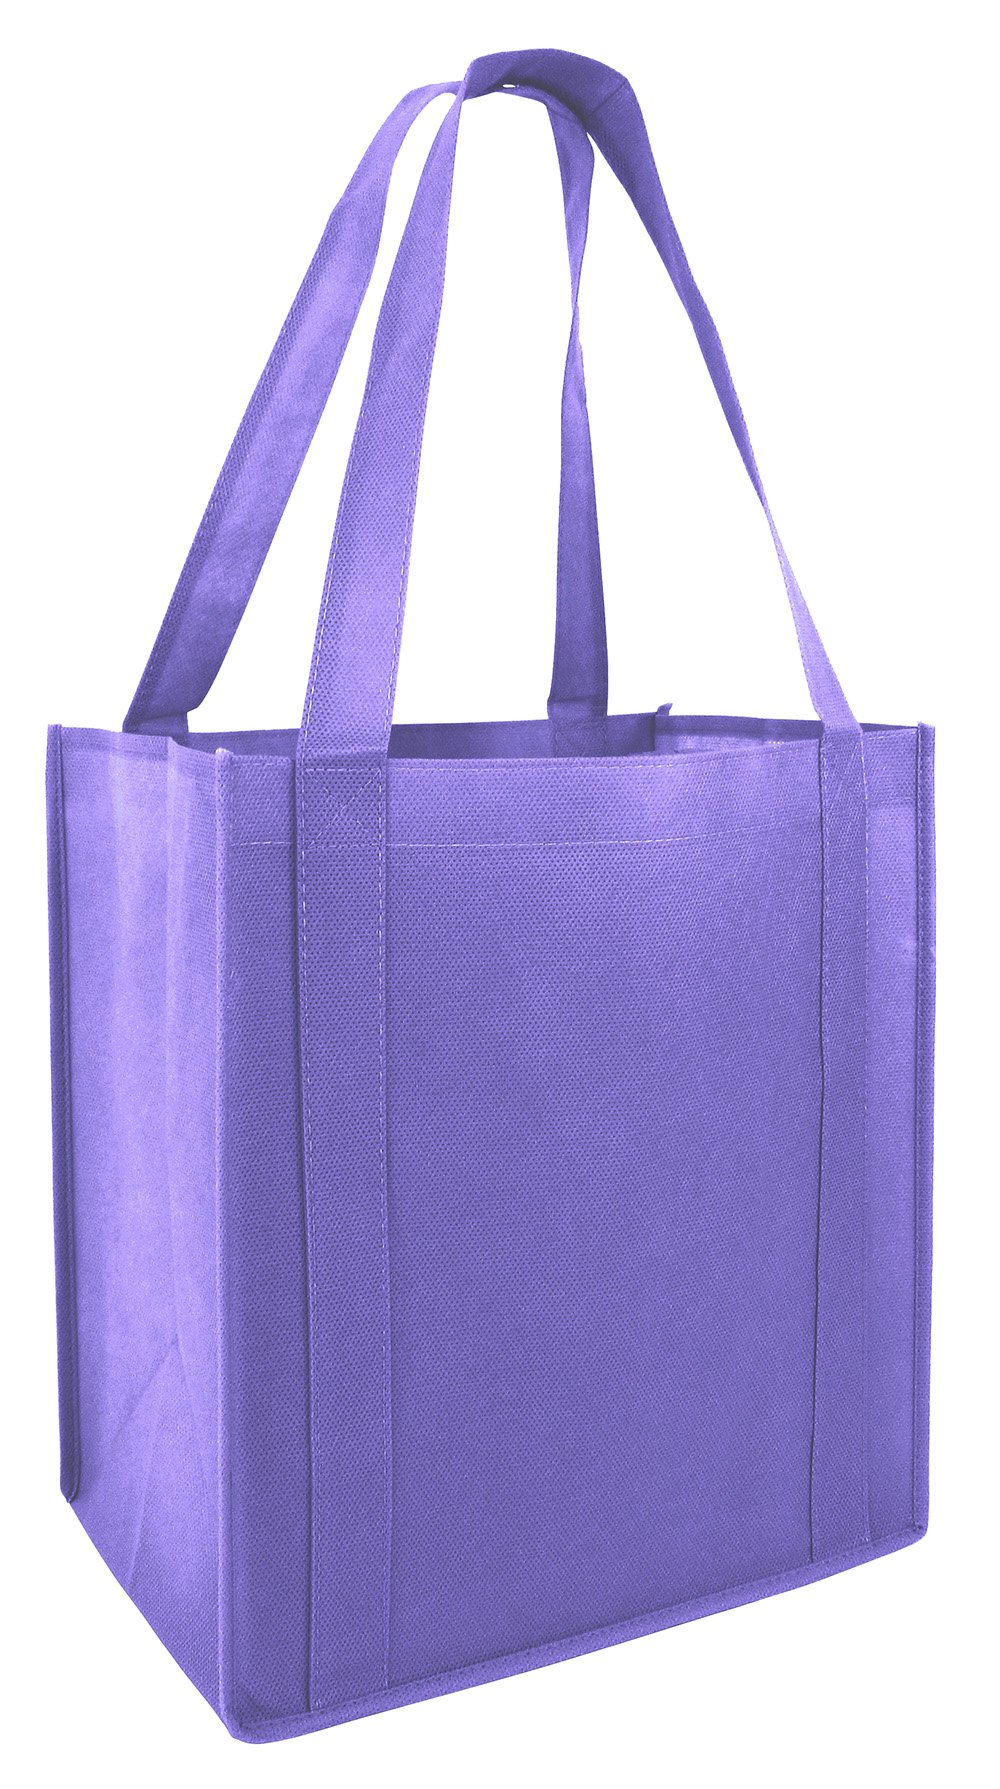 200 ct Reusable Grocery Bag / Shopping Tote with PL Bottom - By Case